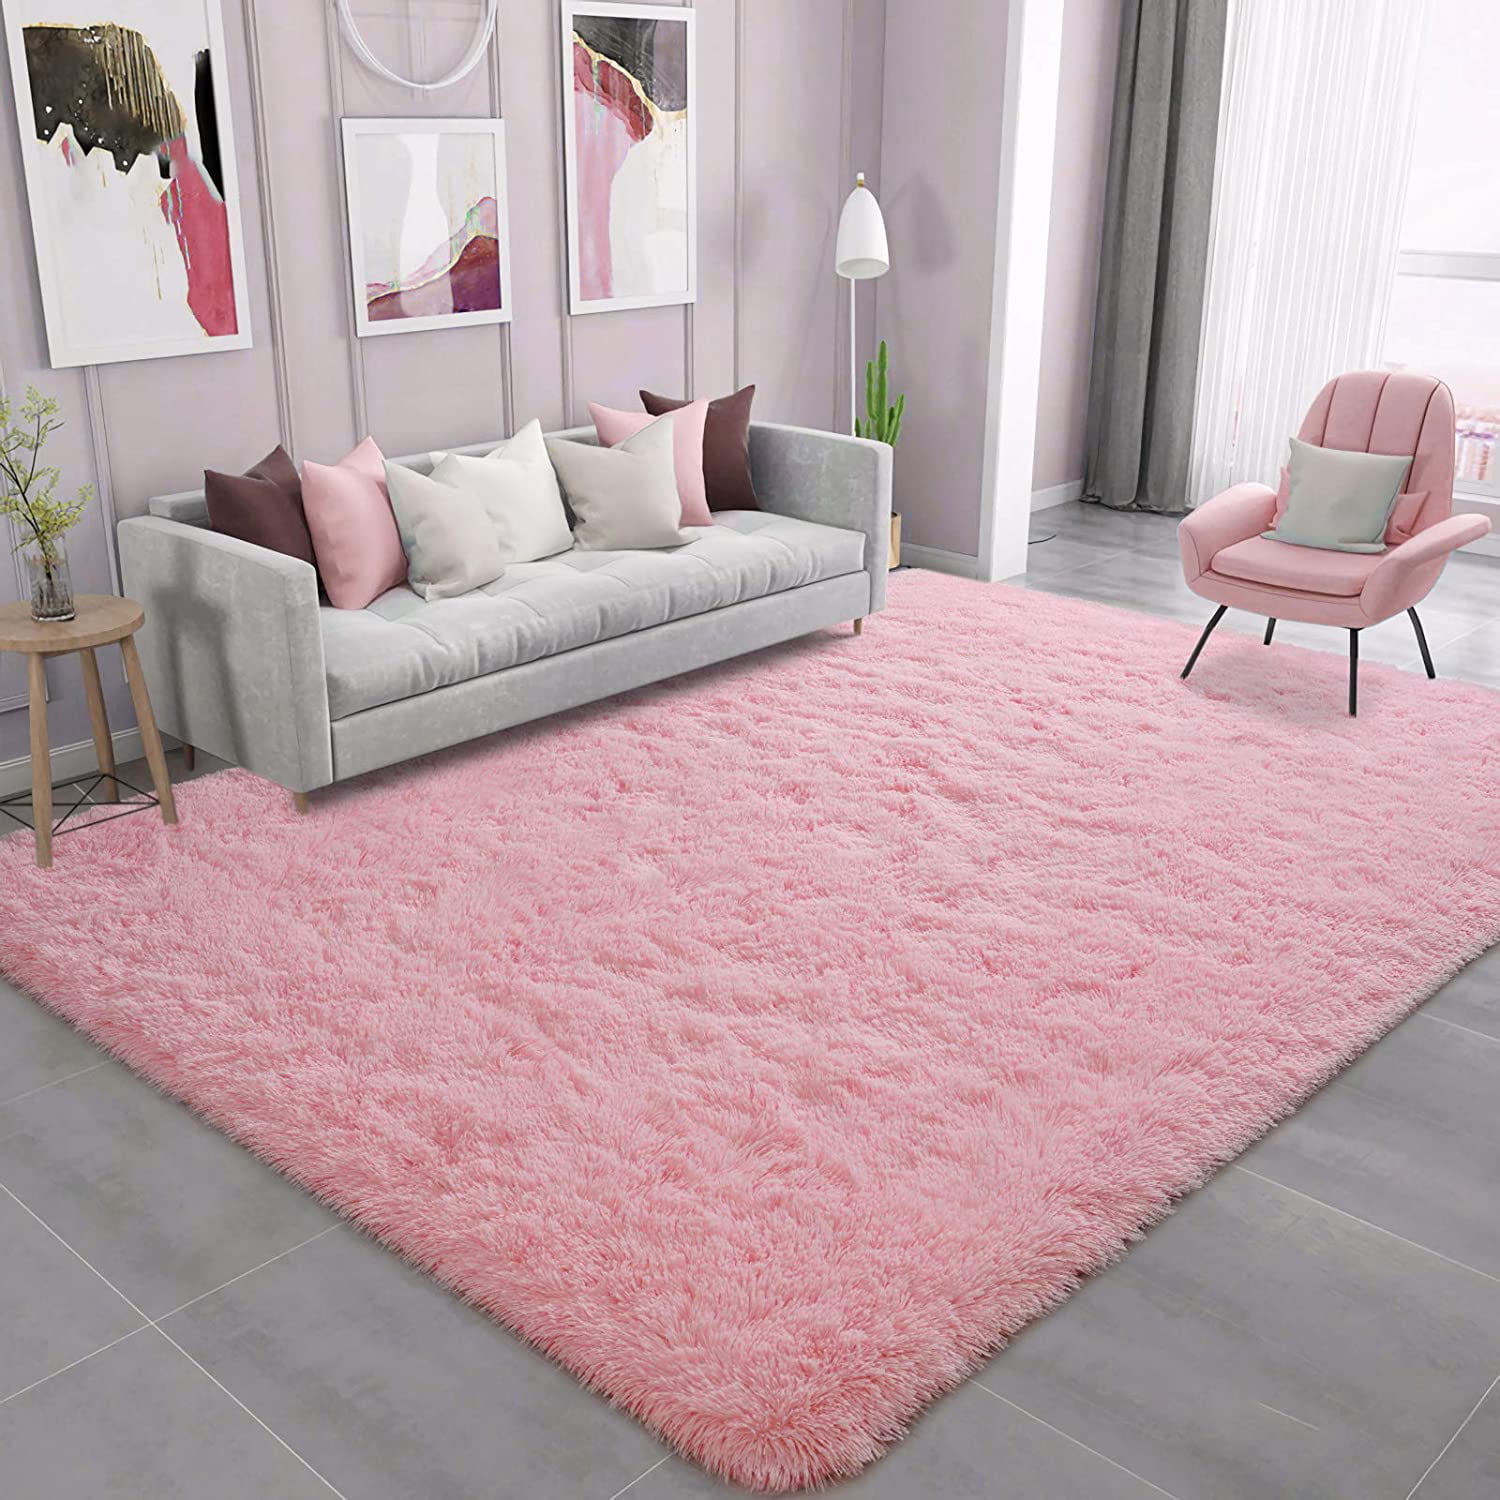 Noahas Soft Fluffy Area Rug for Living Room Bedroom Shaggy Accent Carpets for Kids Girls Rooms Pink, 5 x 8 Feet - image 1 of 7